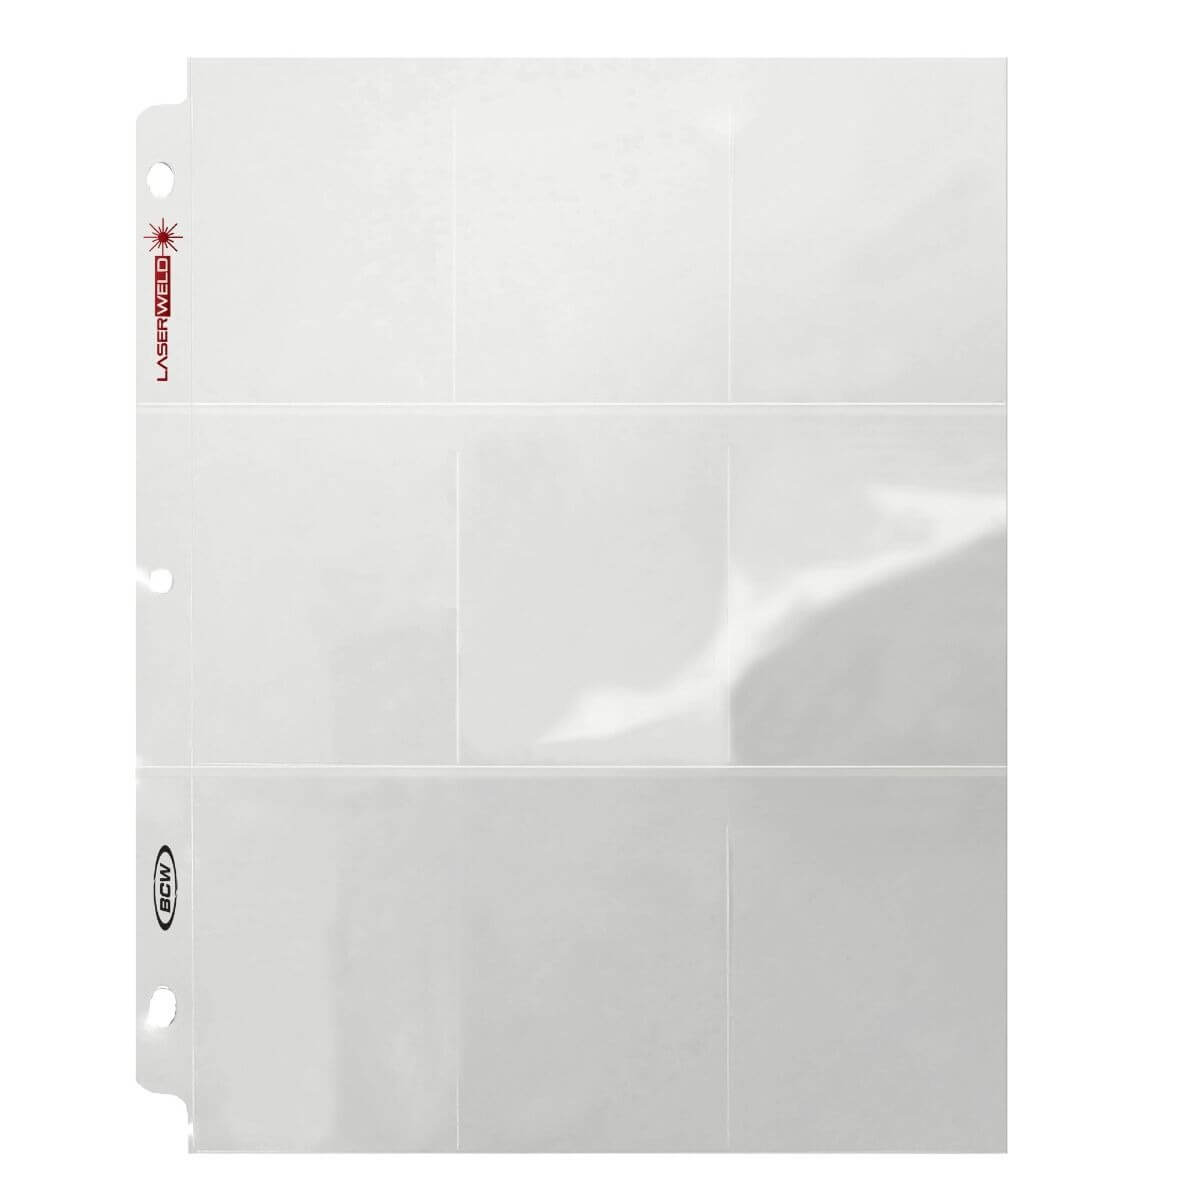 BCW LaserWeld Pages - 9 Pocket - 20ct Pack